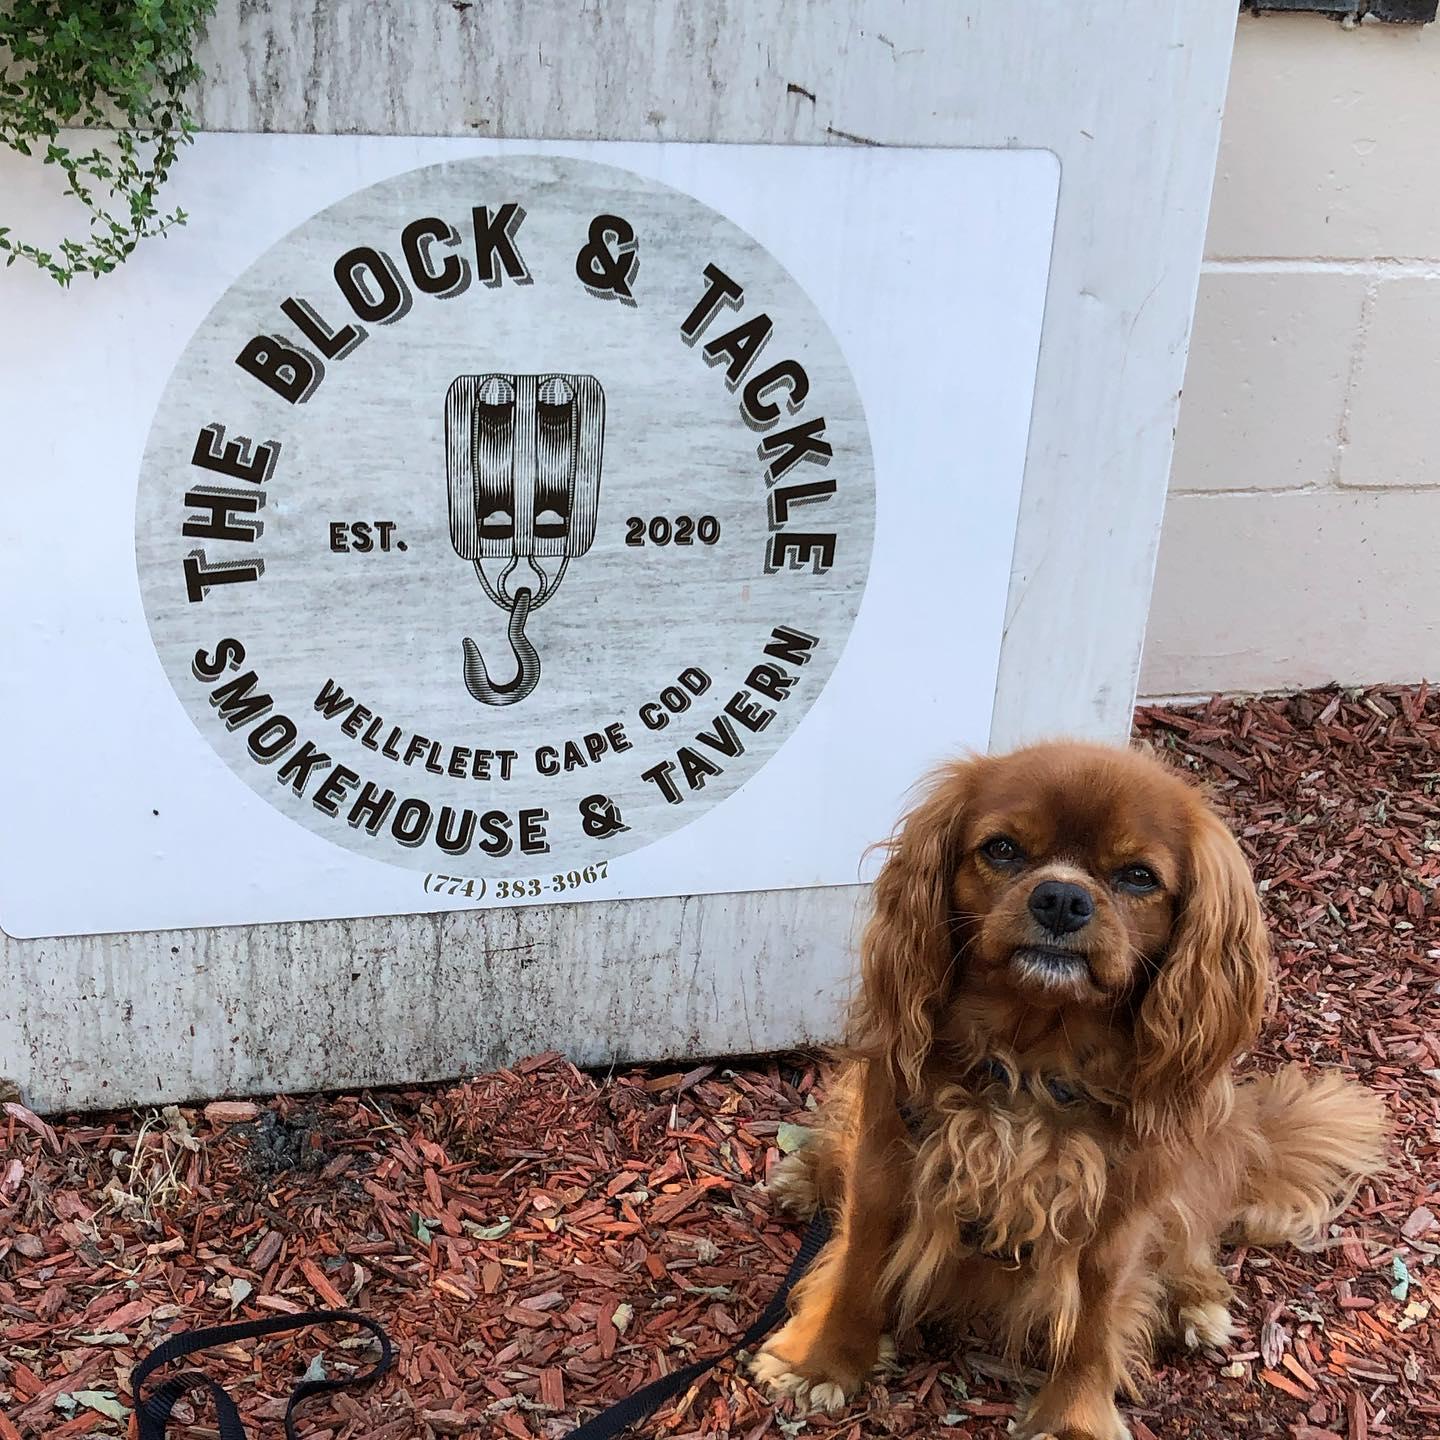 Pet Friendly The Block & Tackle